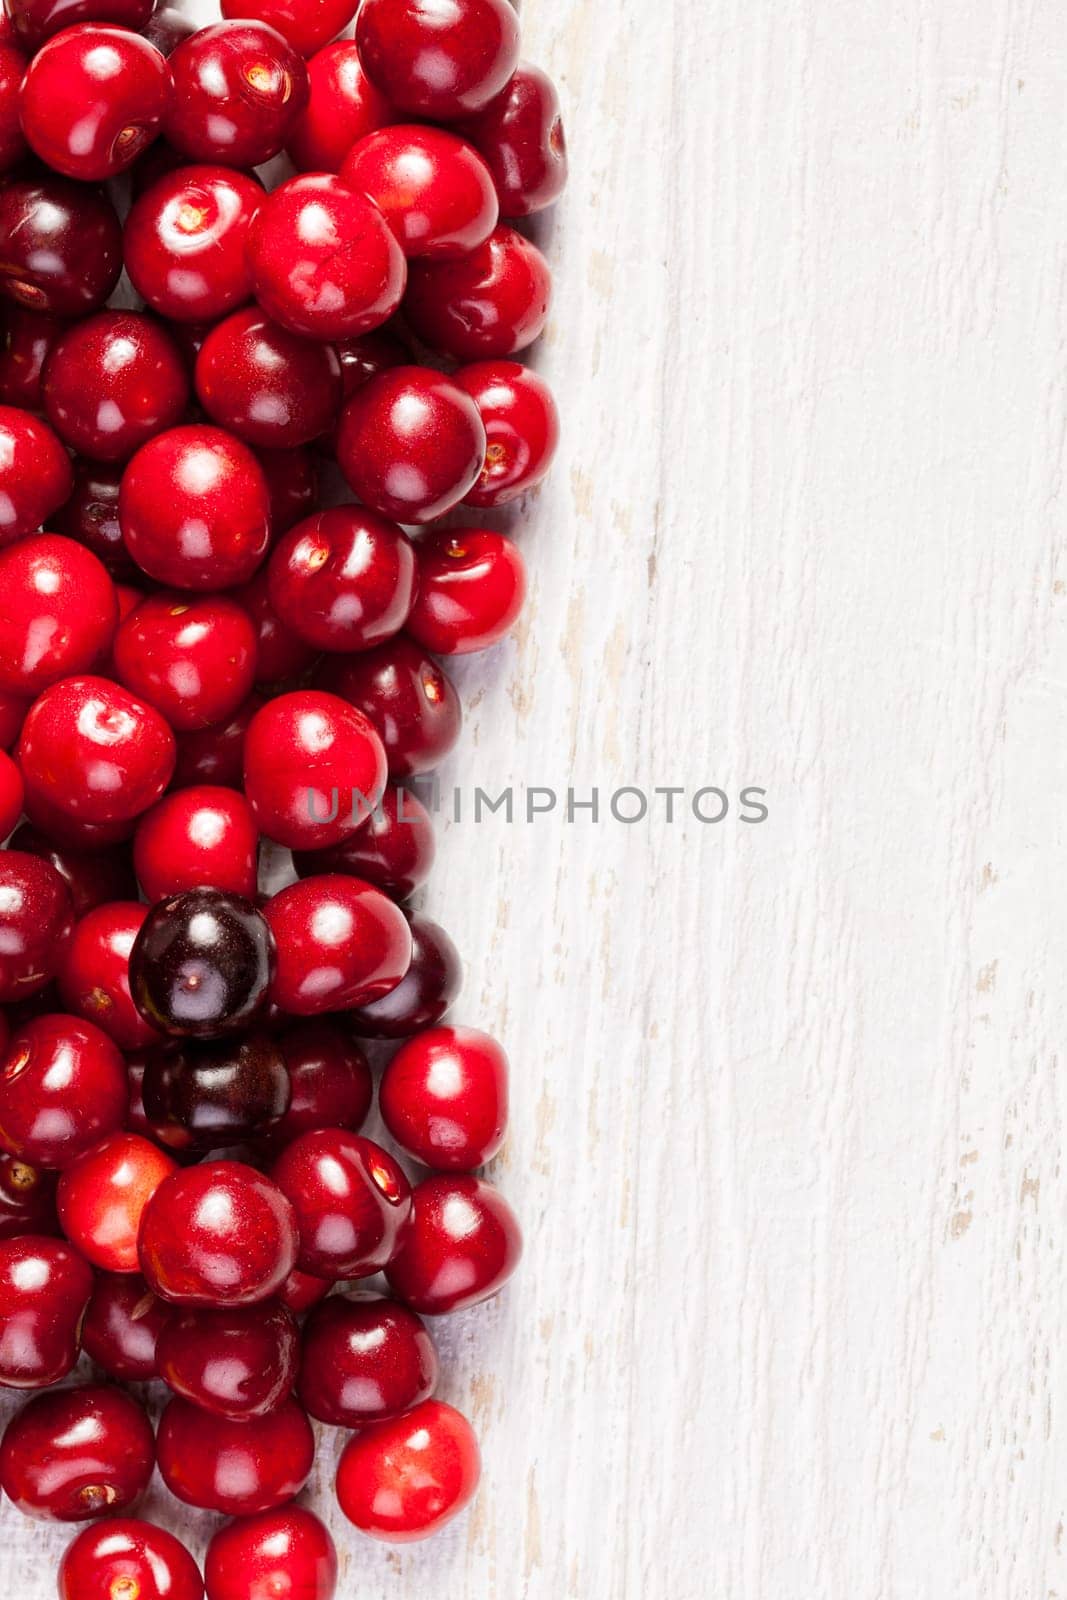 Delicious cherries on white wooden background in close up photo with copyspace available